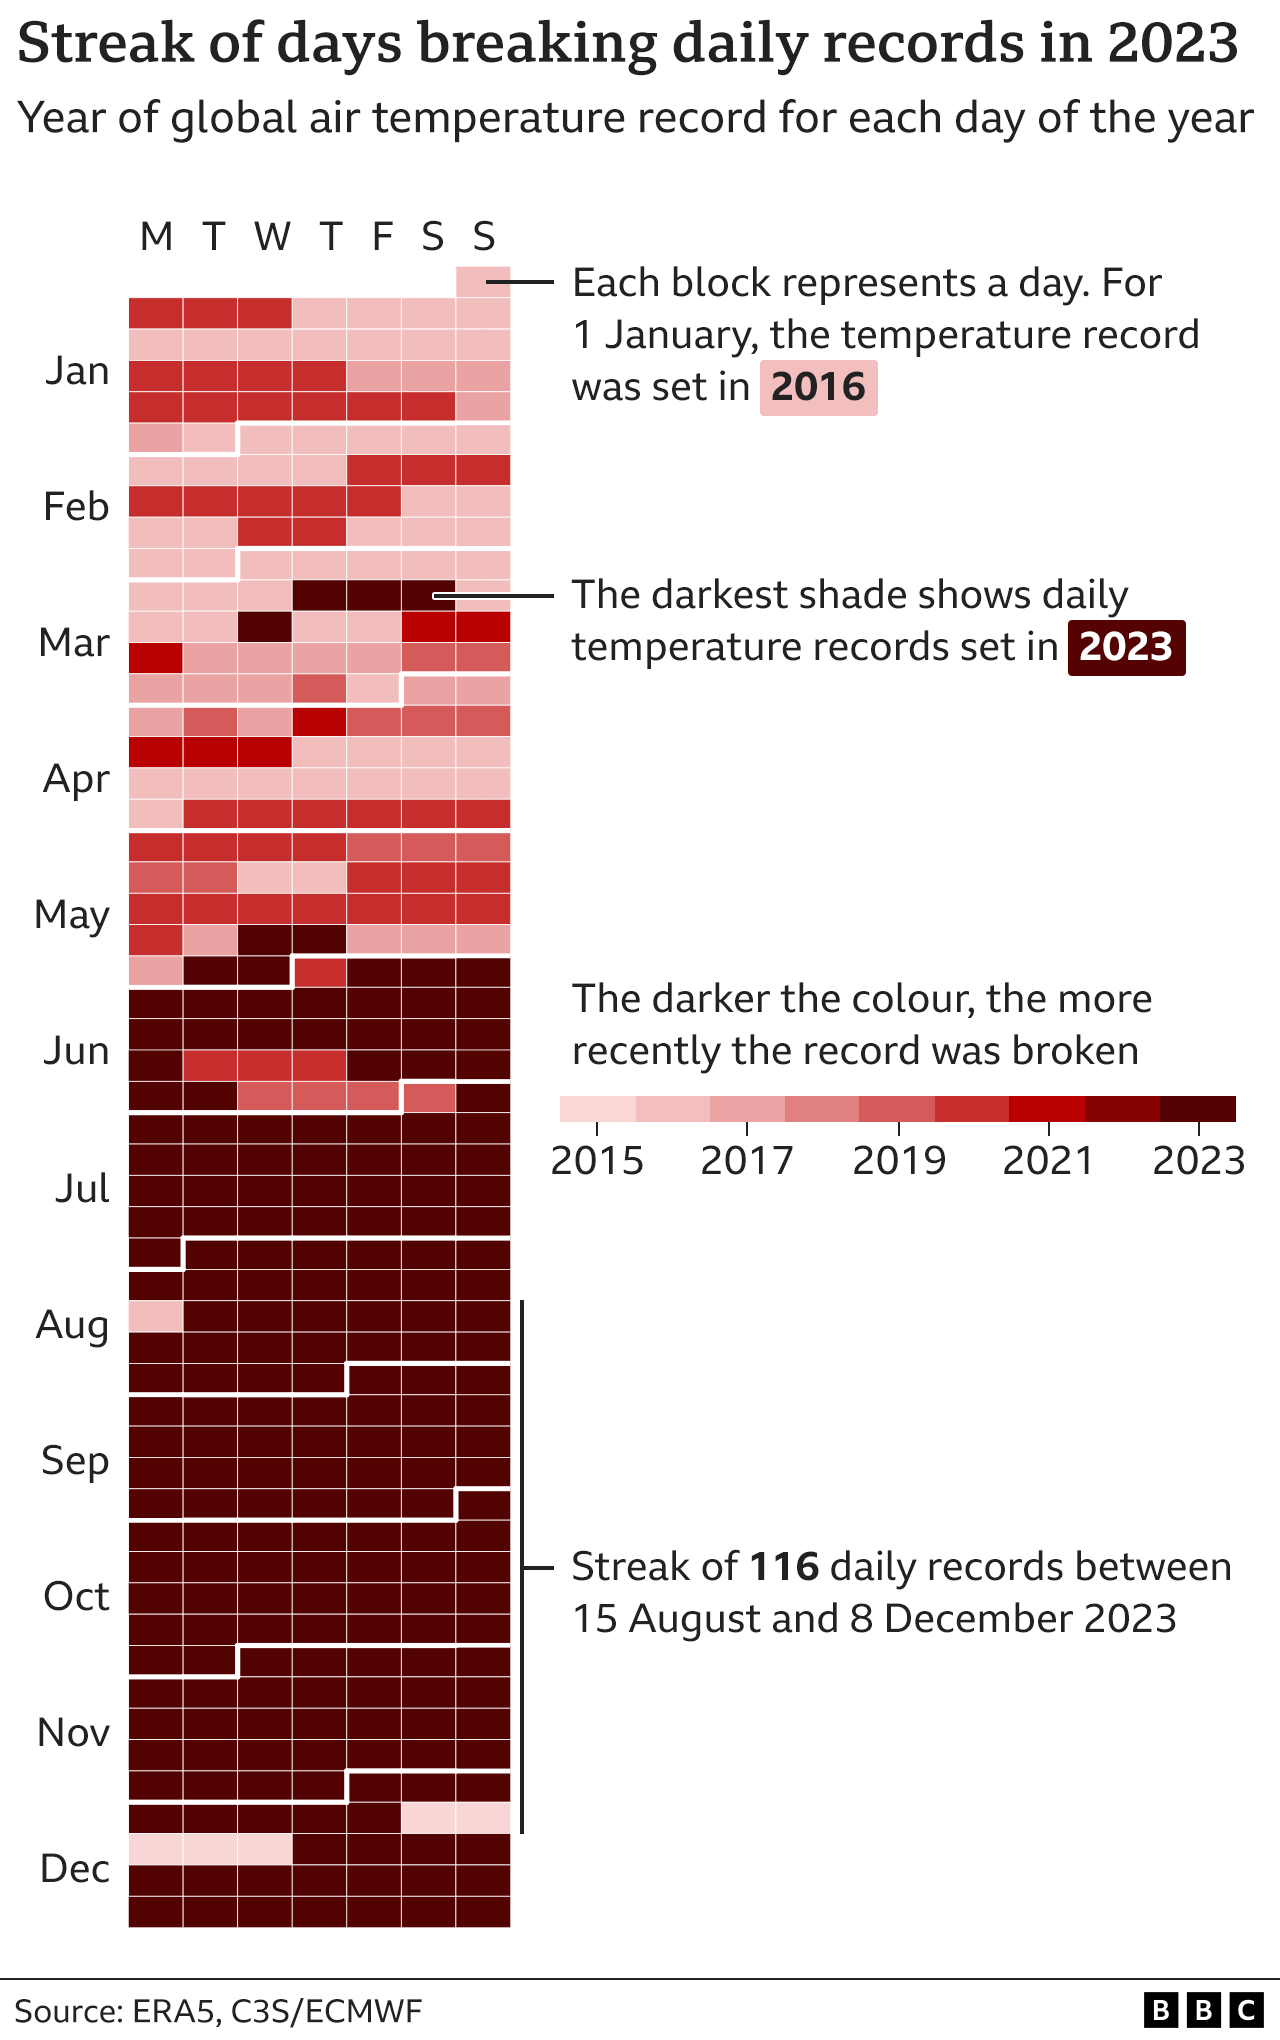 Calendar showing which year holds the daily global air temperature record for each day of the year. In the second half of 2023, almost every day broke the previous daily record, including a 116-day streak between 15 August and 8 December.